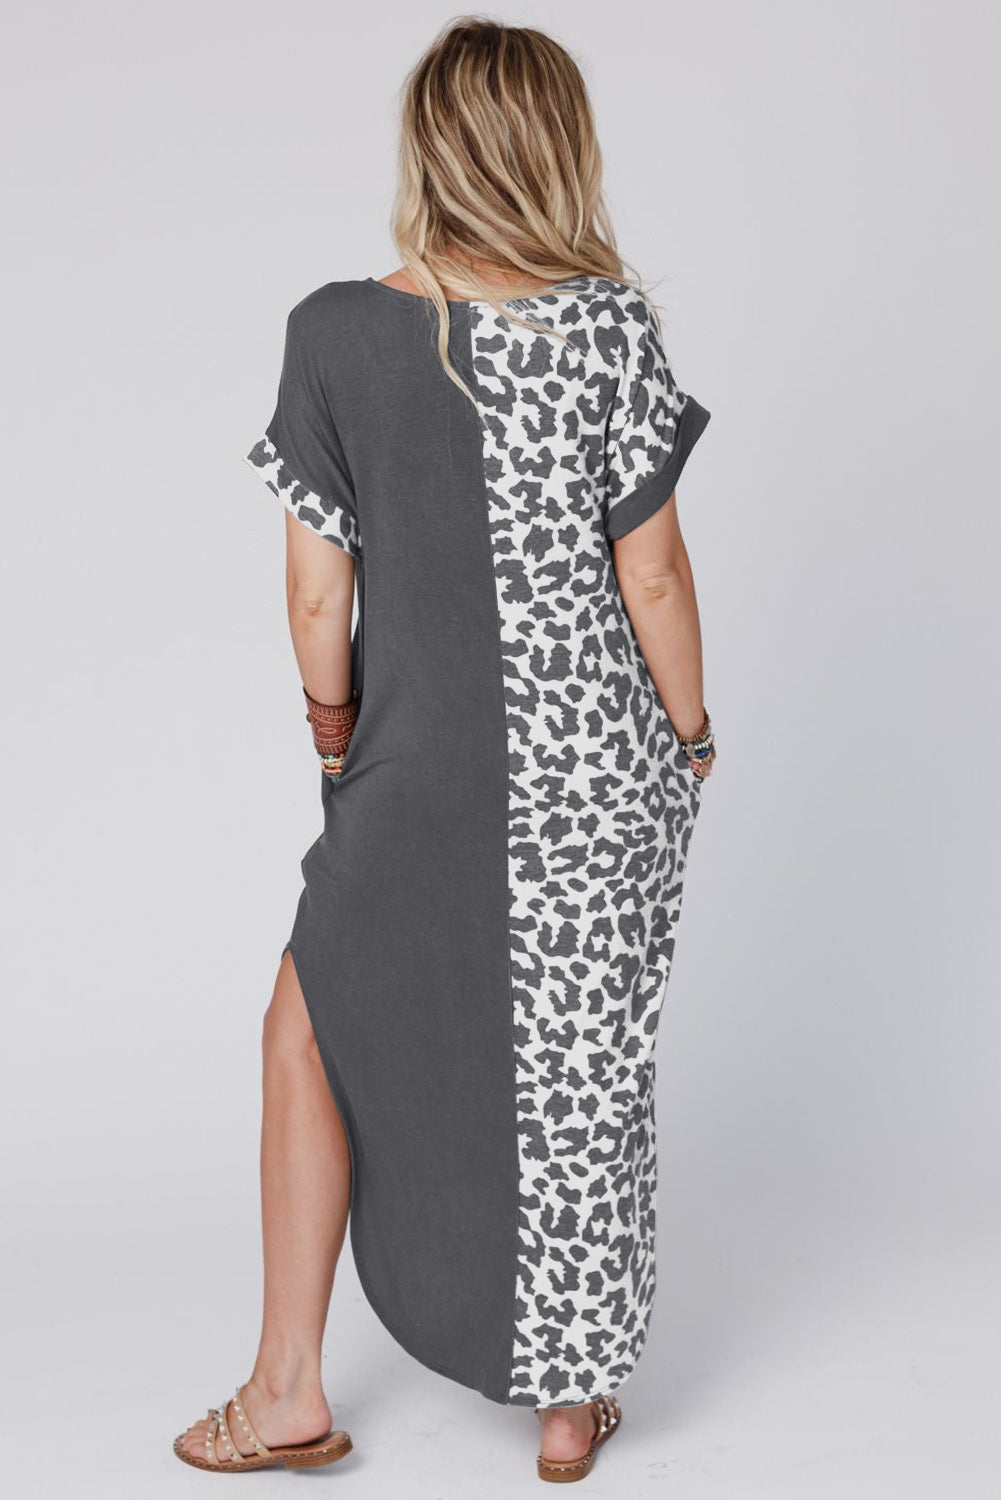 Gray Contrast Solid Leopard Short Sleeve T-shirt Dress with Slits